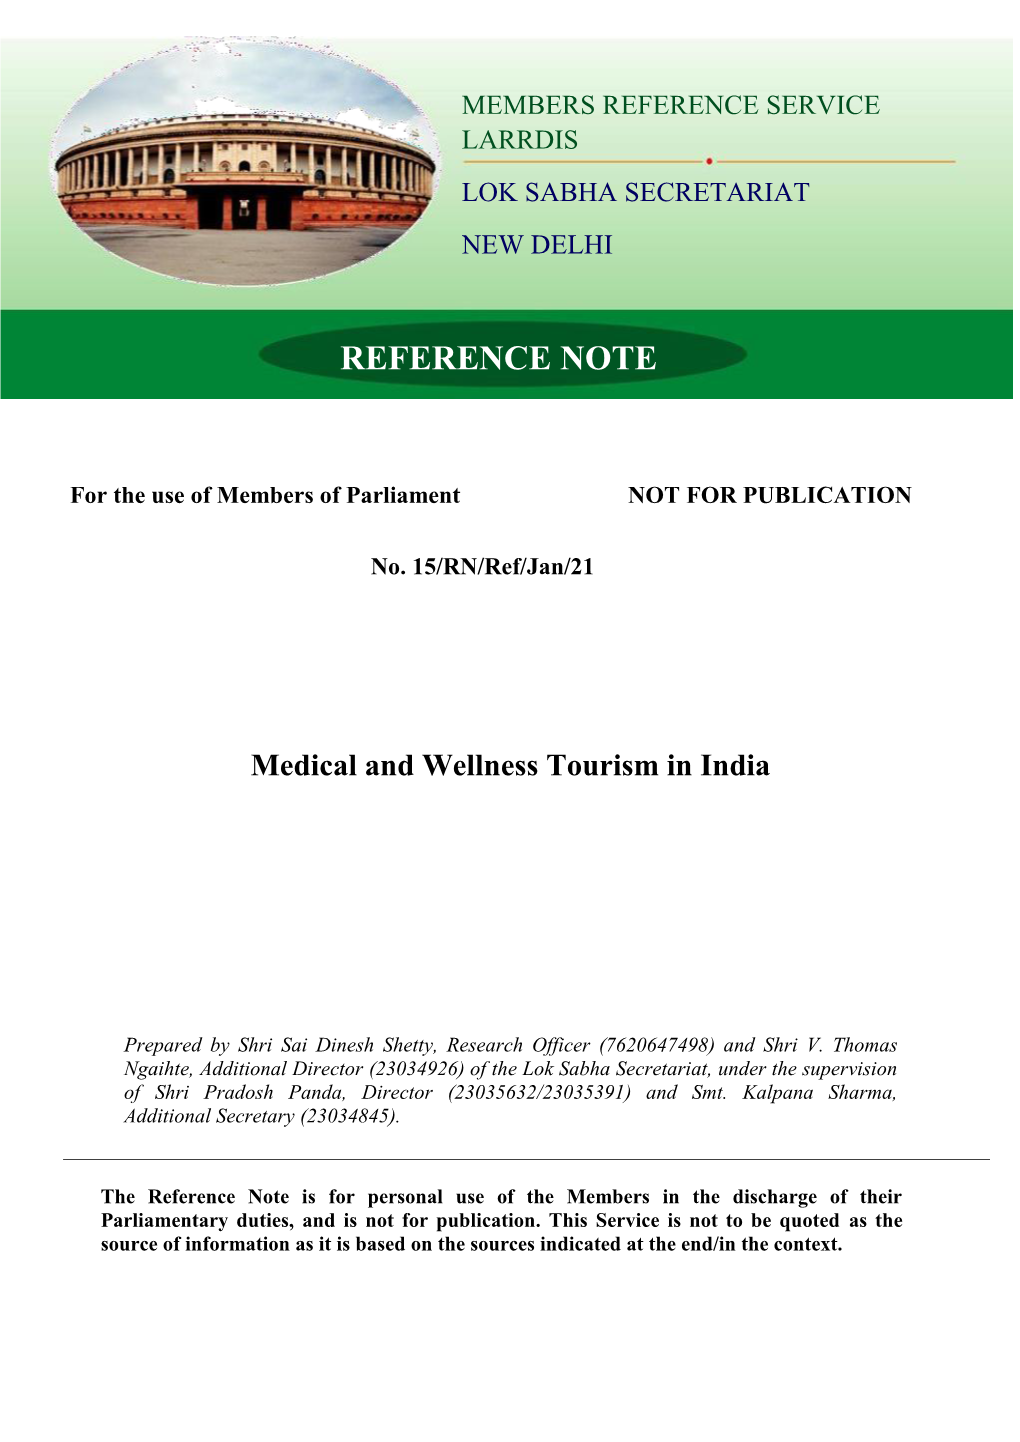 Medical and Wellness Tourism in India